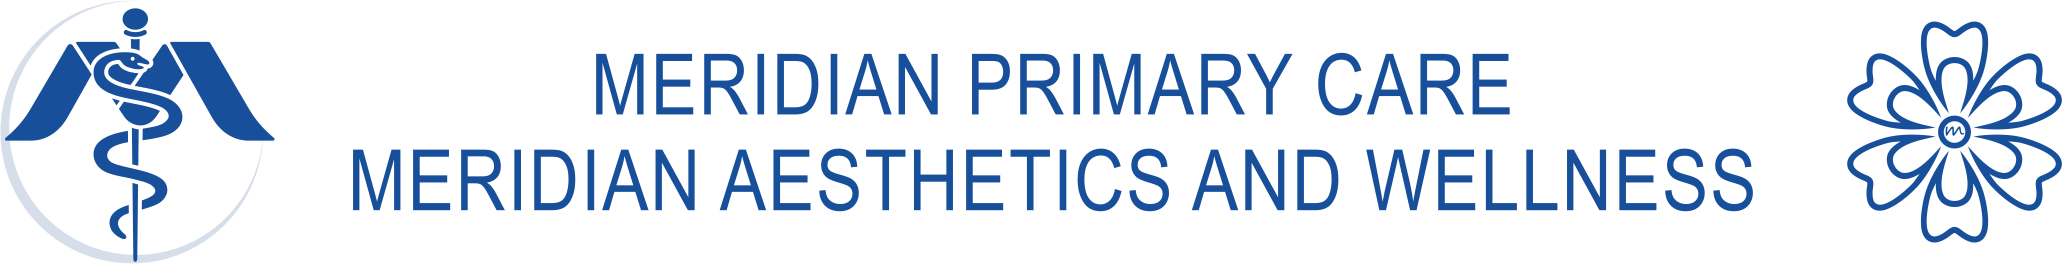 Meridian Primary Care